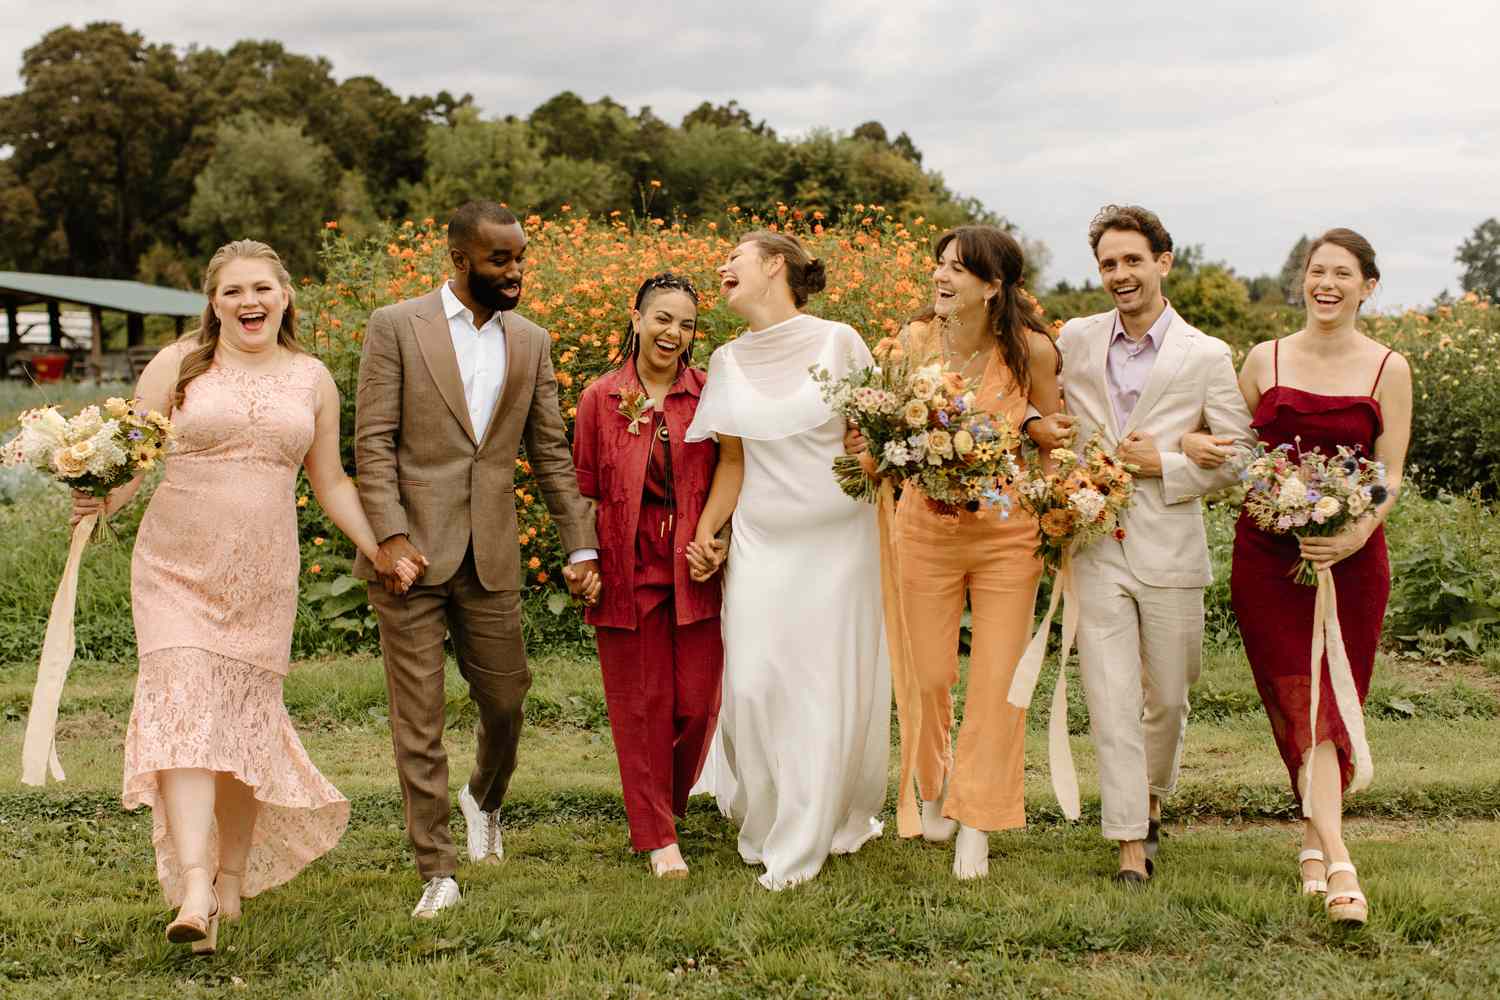 Wedding party of men and women walking through grass, laughing and smiling, holding bouquets of flowers. 